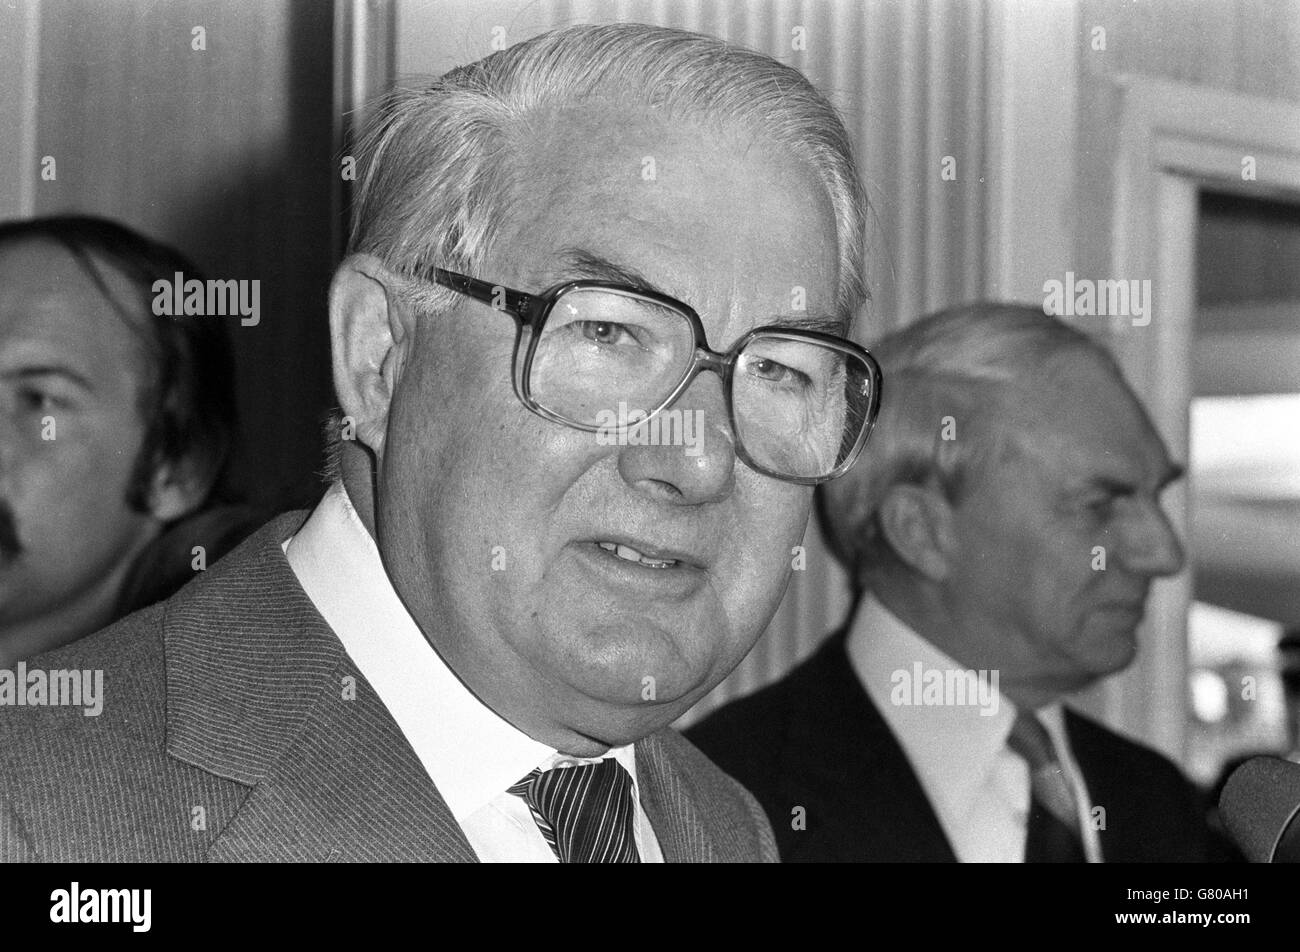 The Prime Minister, Mr James Callaghan at london's Heathrow airport when he returned from his 'Sunshine Summit' in the Caribbean to Britain's worsening industrial crisis. Stock Photo